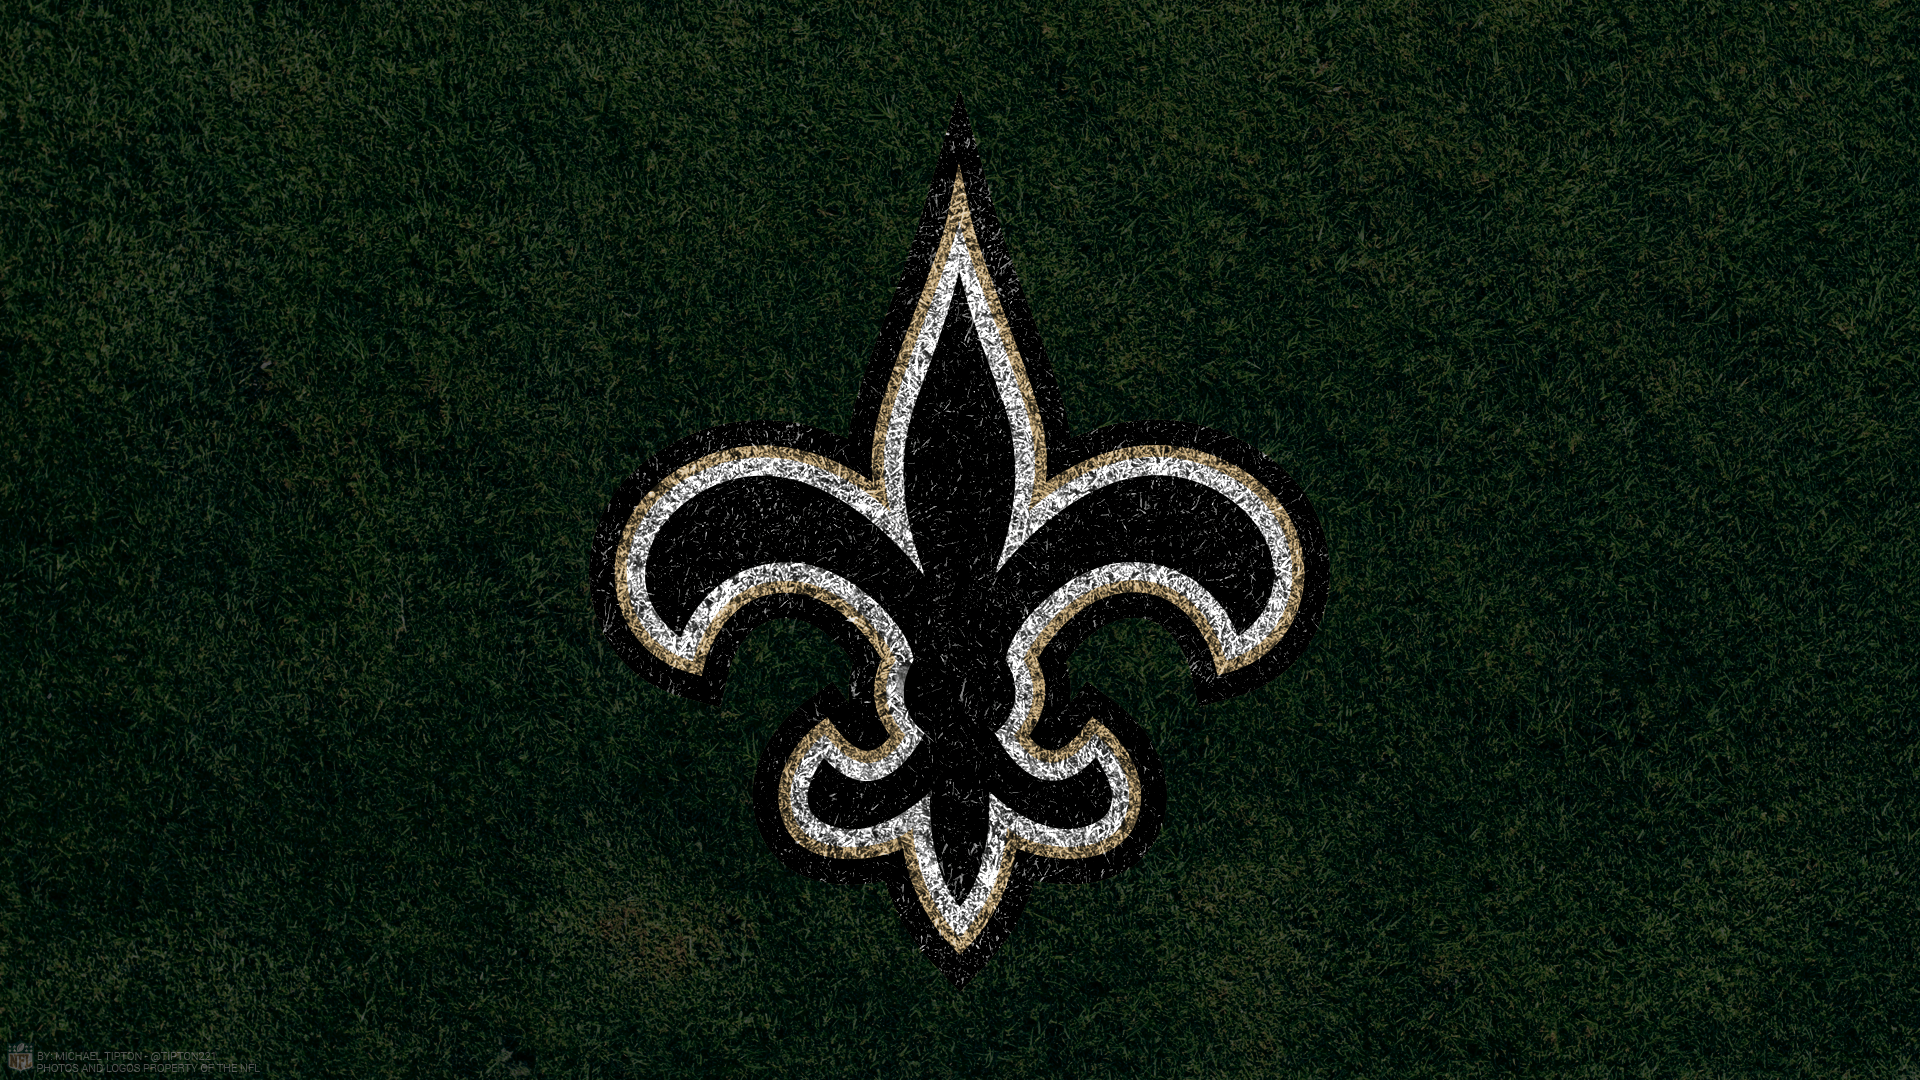 New Orleans Saints Wallpaper. iPhone. Android